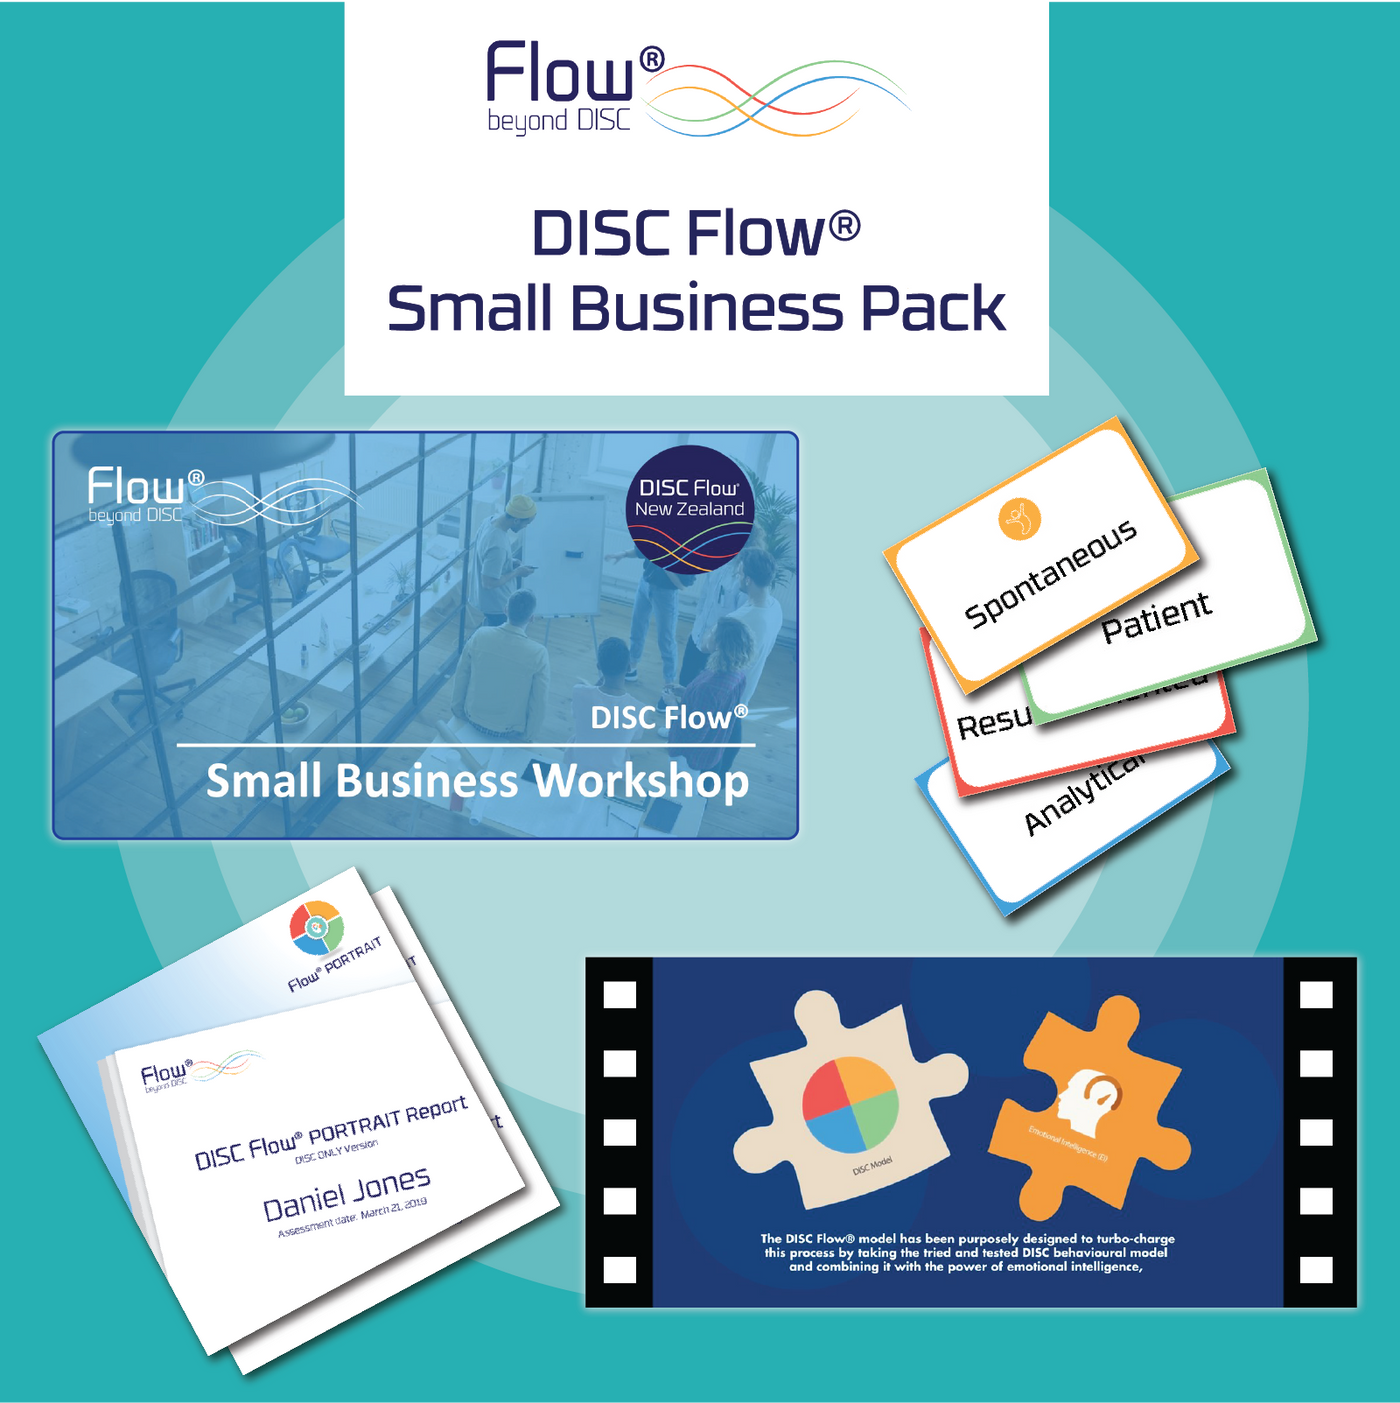 DISC Flow Small Business Workshop